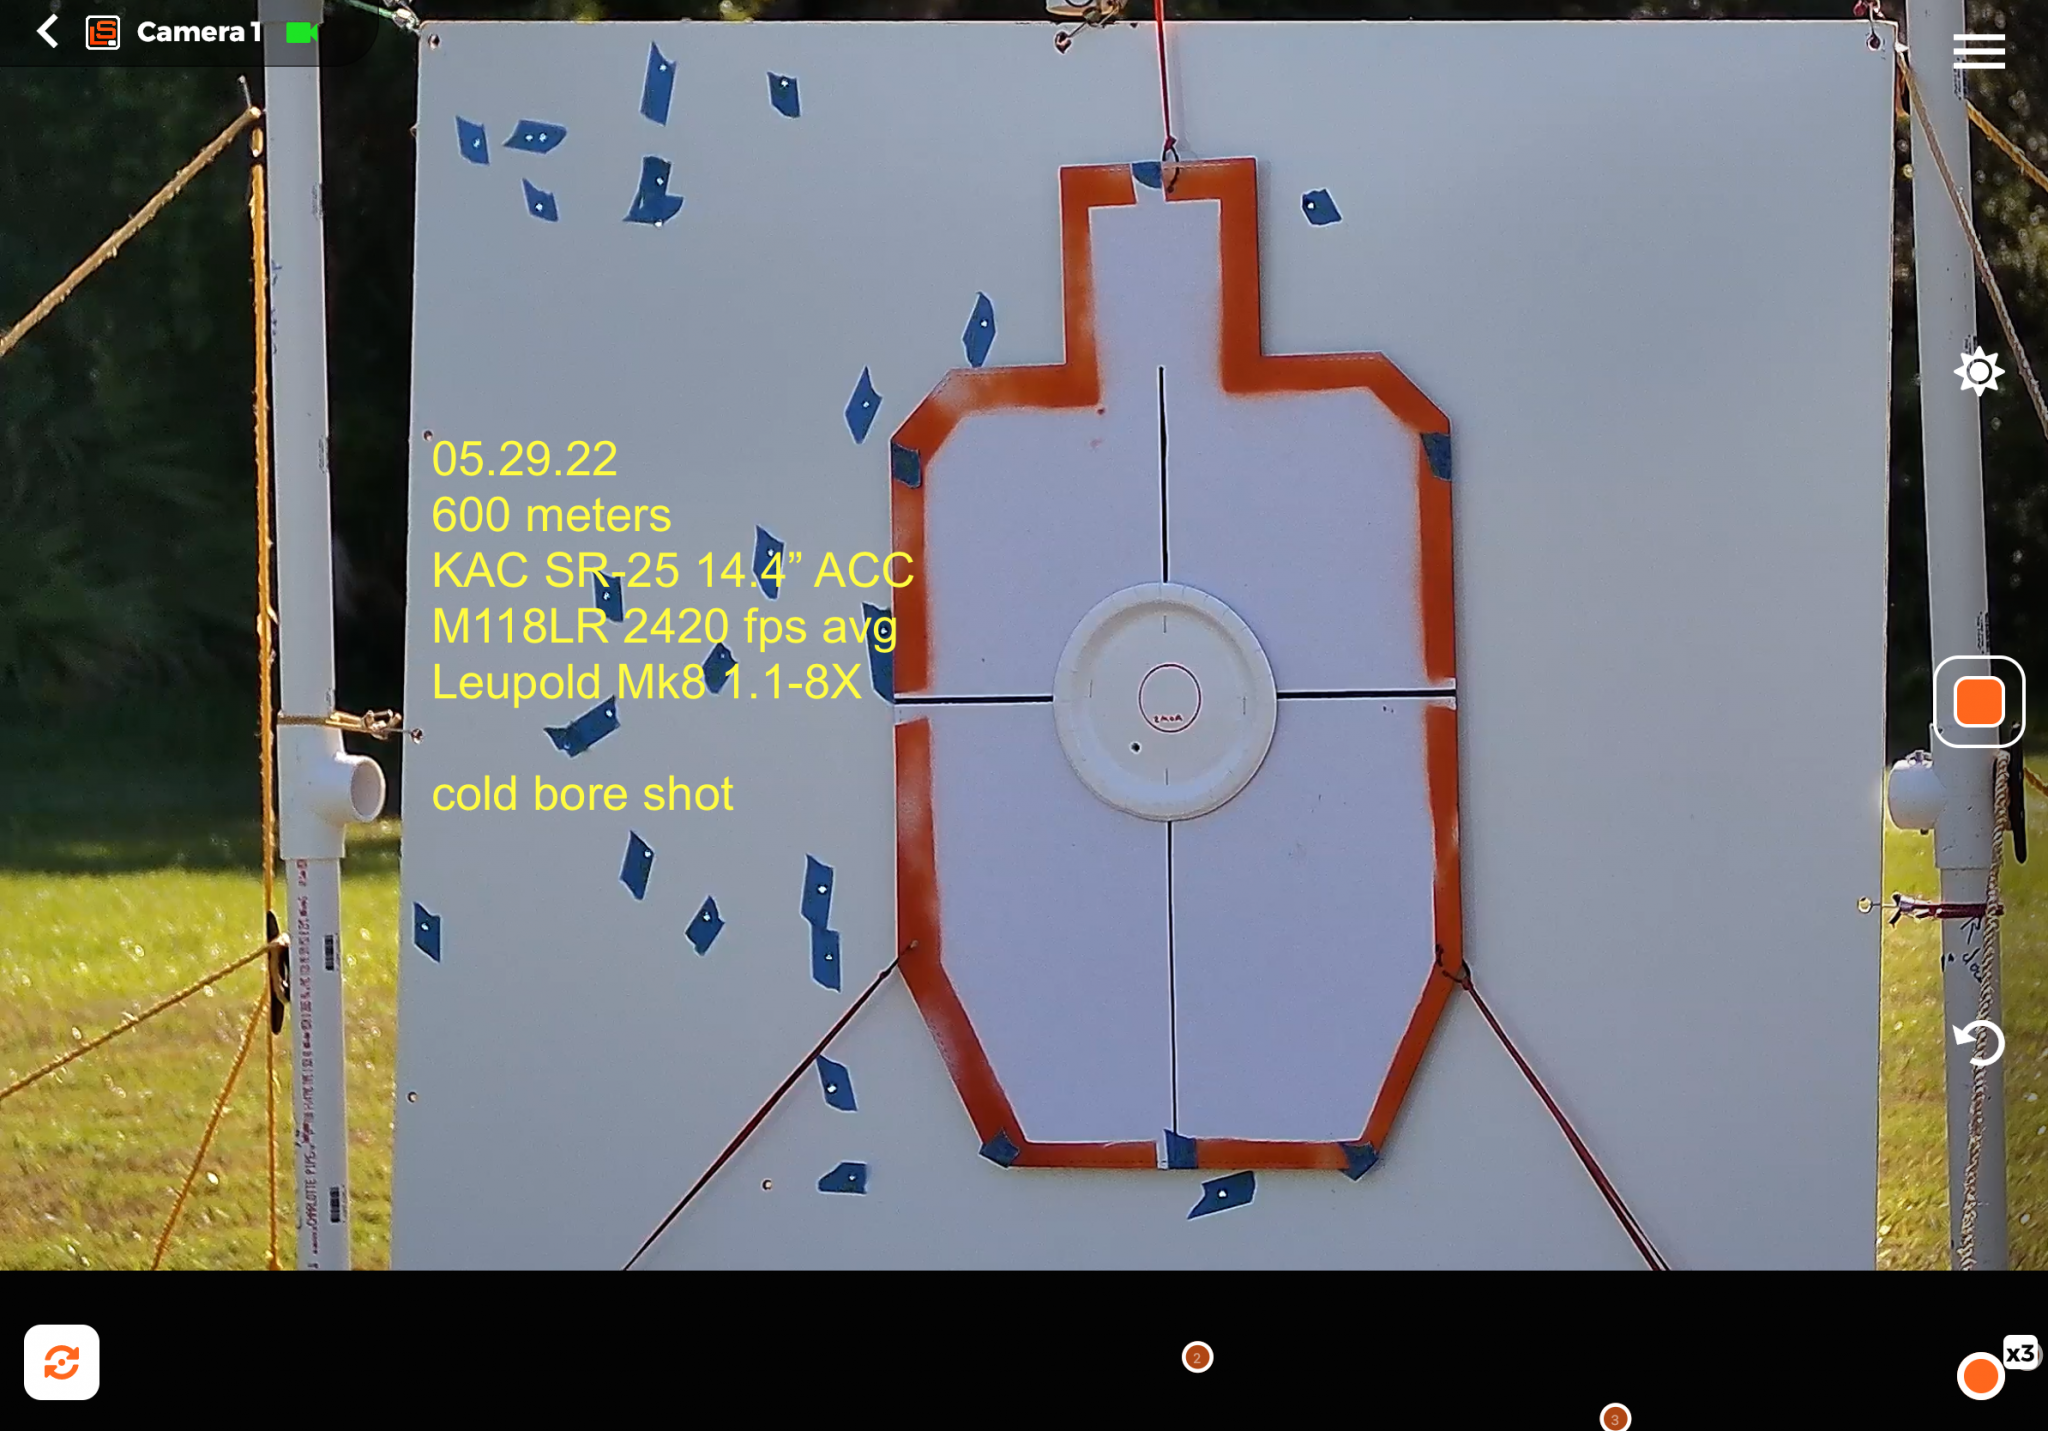 IMG_3224CRACKER SWAMP KAC SR-25 7TH Session 600 Meters First Two Shots 05.29.22 copy 3.png